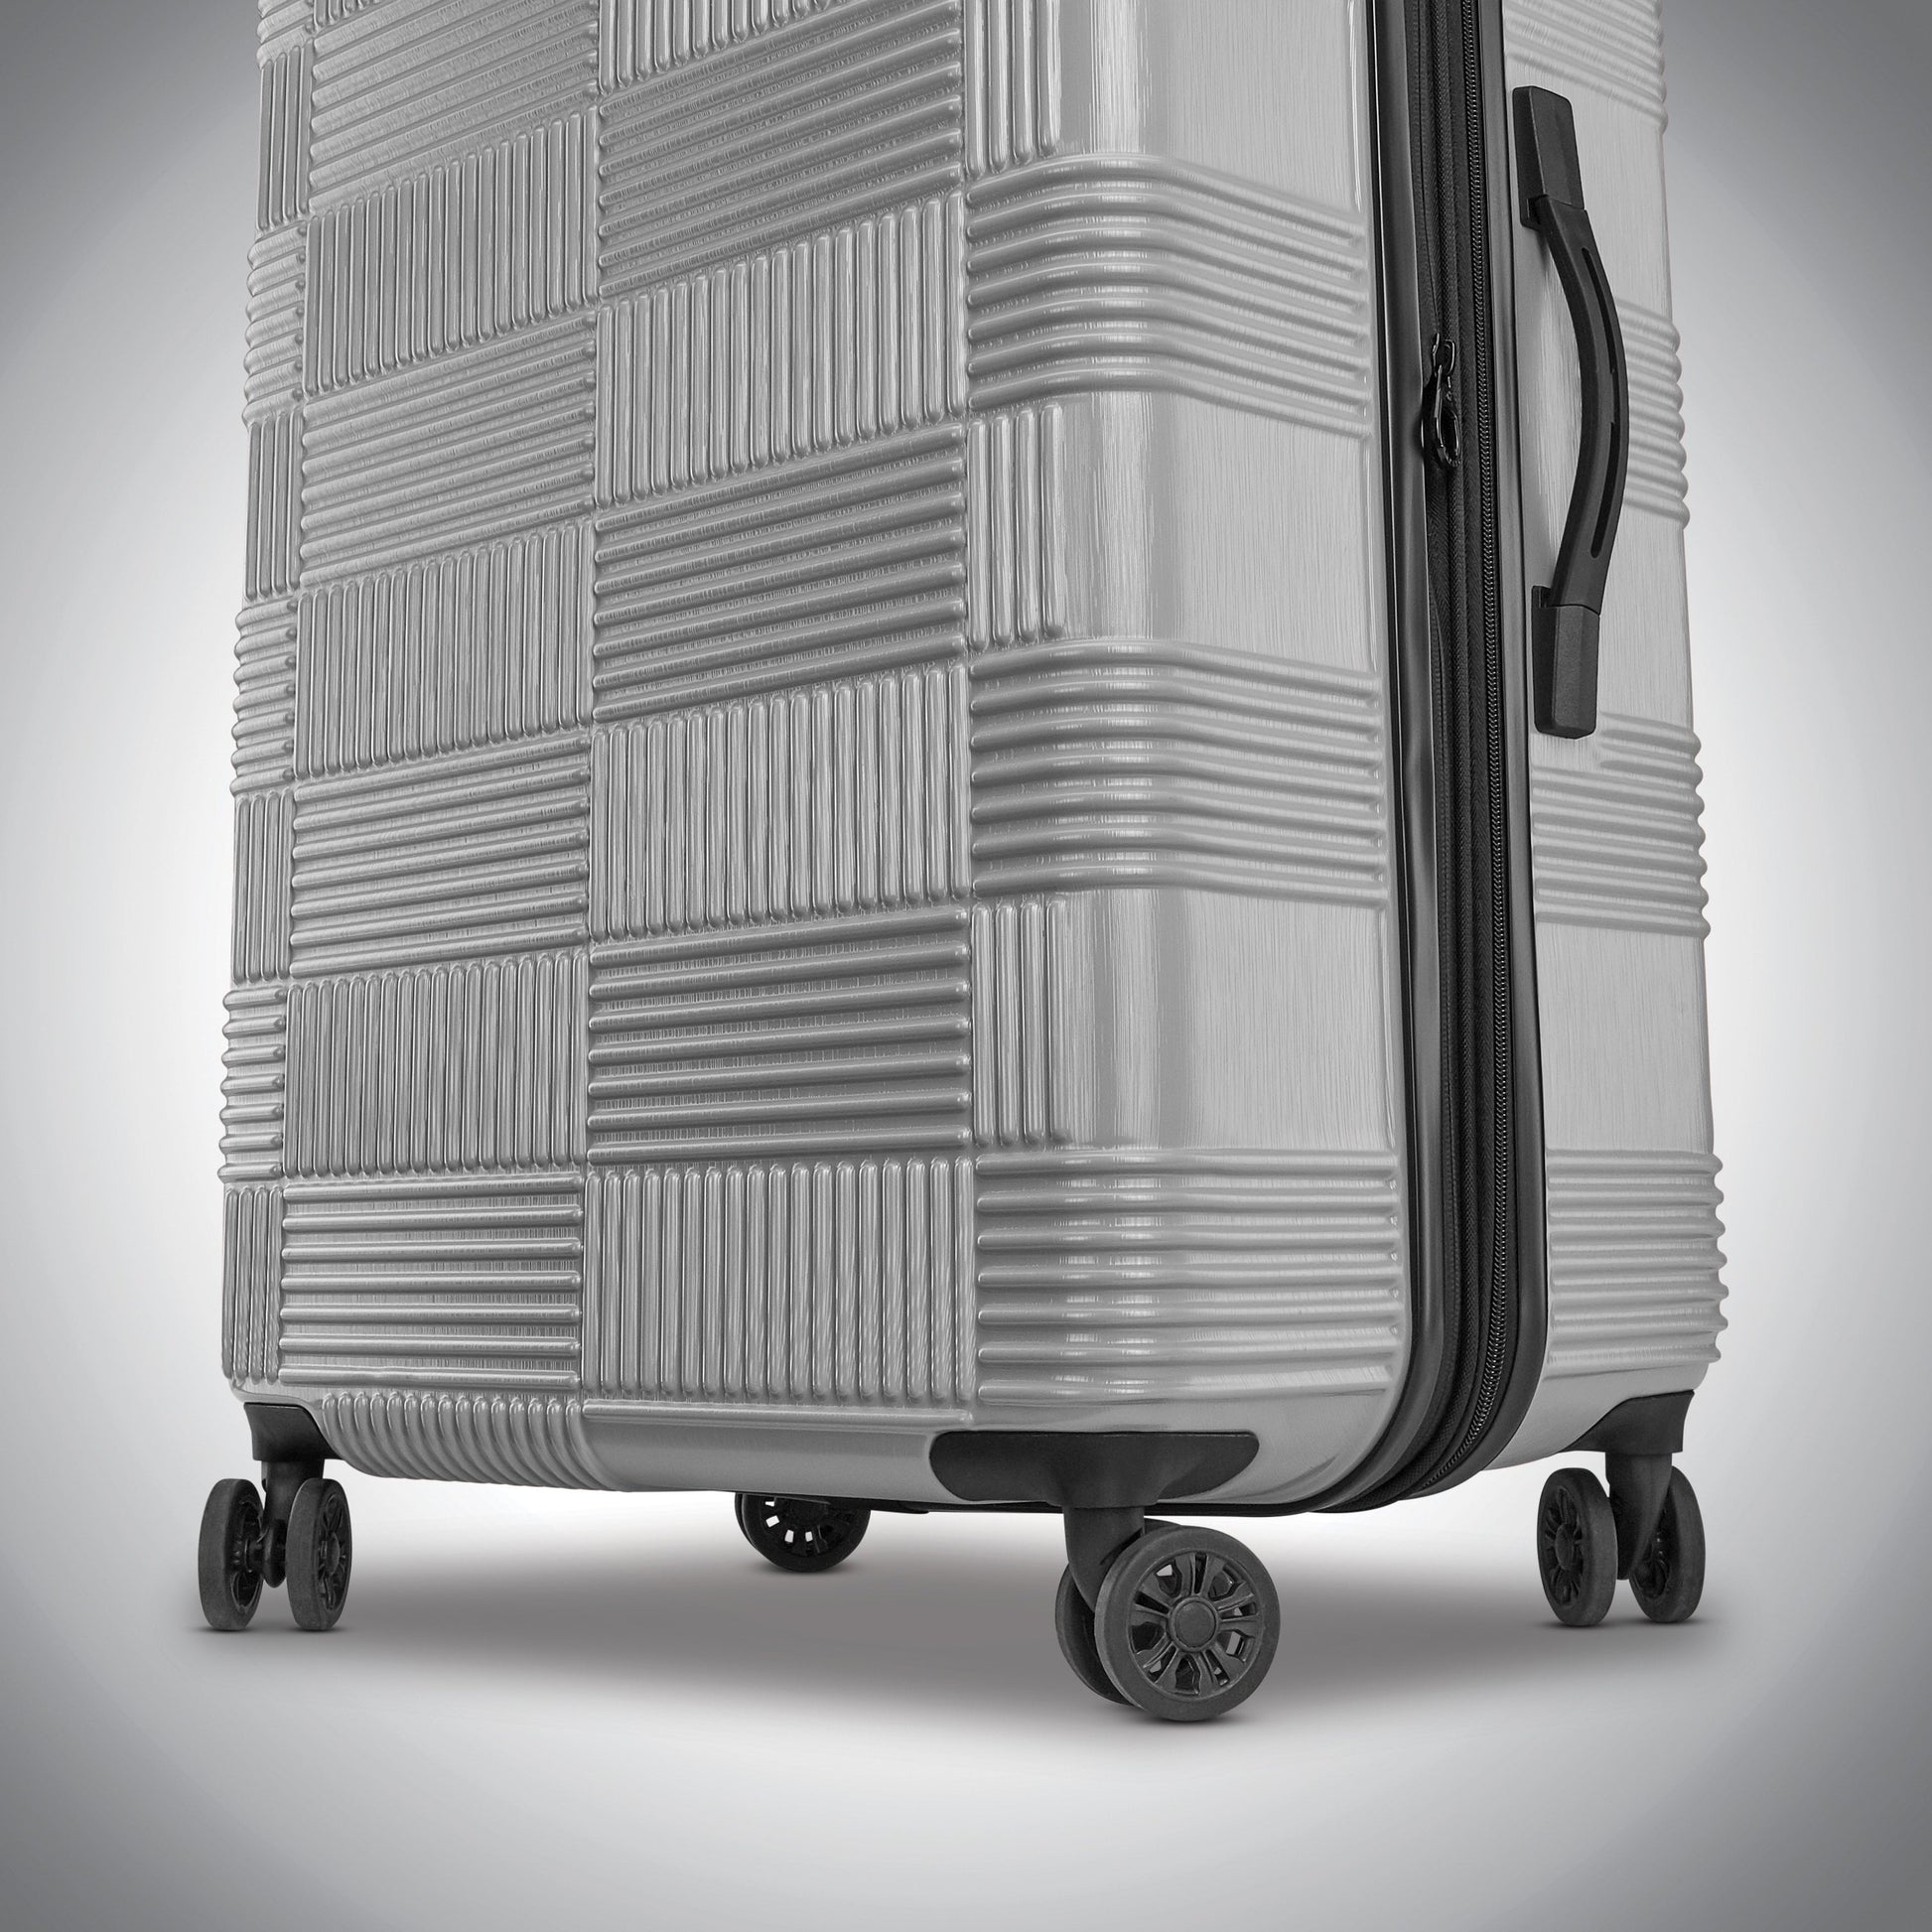 American Tourister Unify Spinner Medium Expandable Luggage